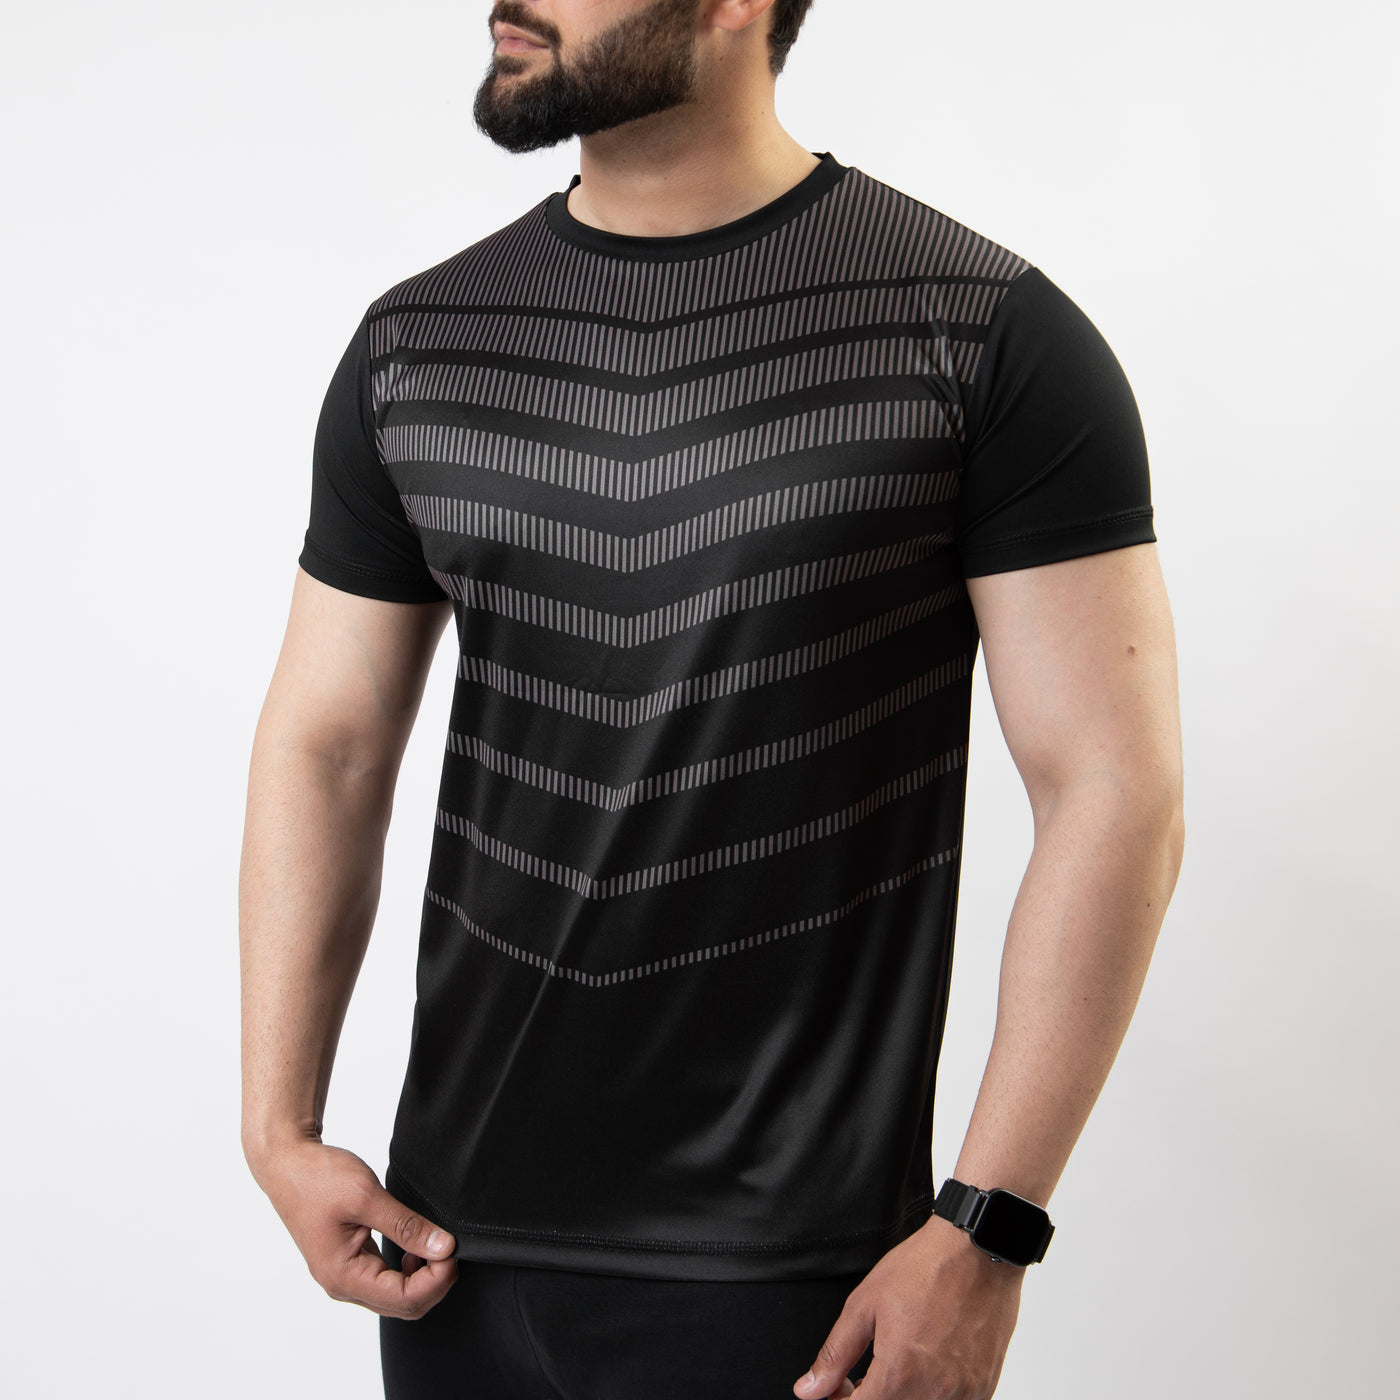 Black Sublimated Quick Dry T-Shirt with Gray Armor Stripes